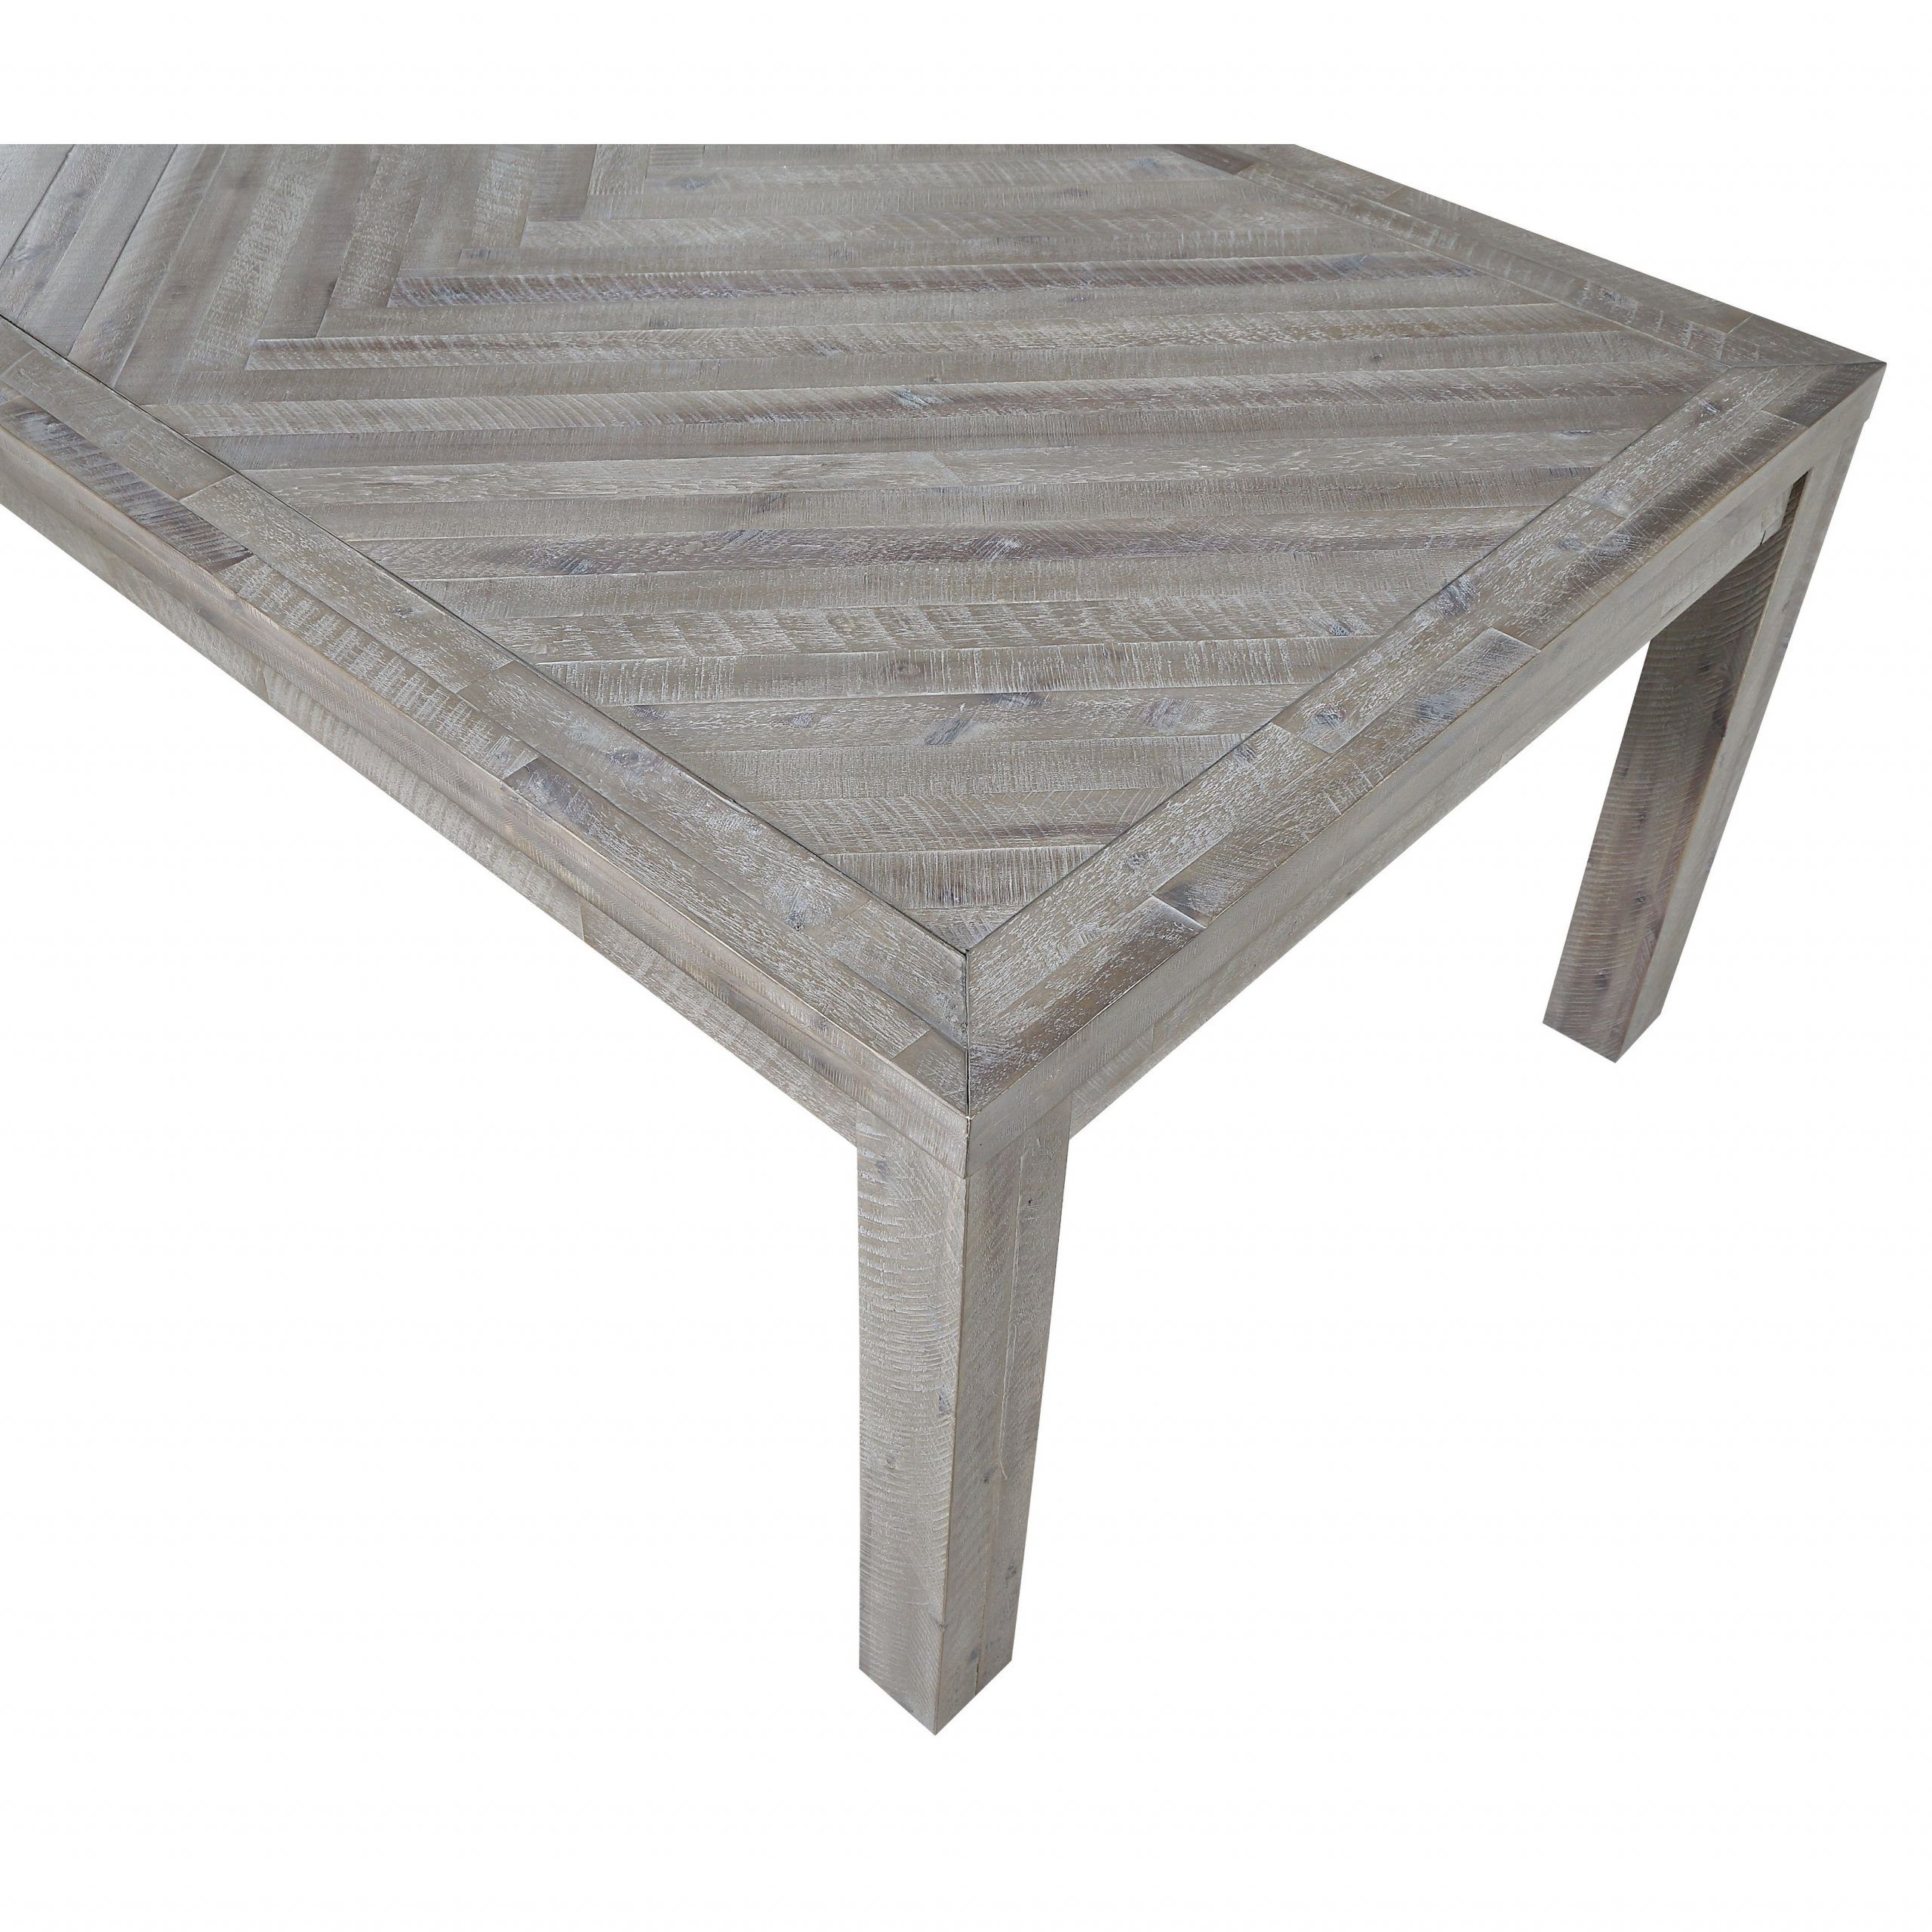 Menlo Reclaimed Wood Extending Dining Tables For Most Popular The Gray Barn Daybreak Solid Wood Rectangular Dining Table In Rustic Latte (View 10 of 25)